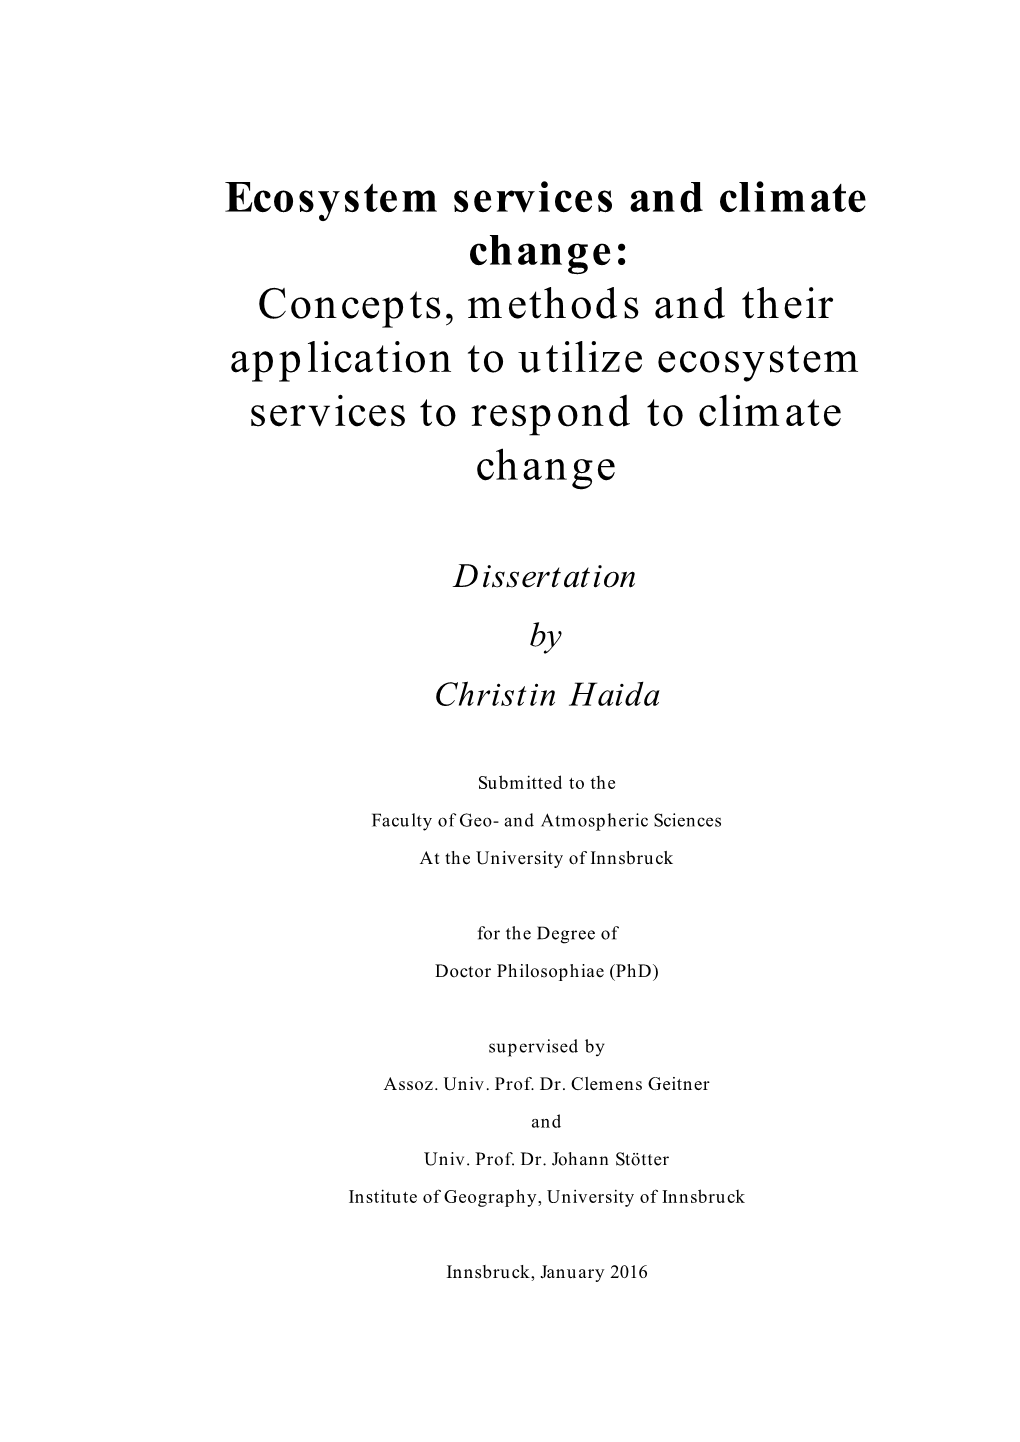 Ecosystem Services and Climate Change: Concepts, Methods and Their Application to Utilize Ecosystem Services to Respond to Climate Change